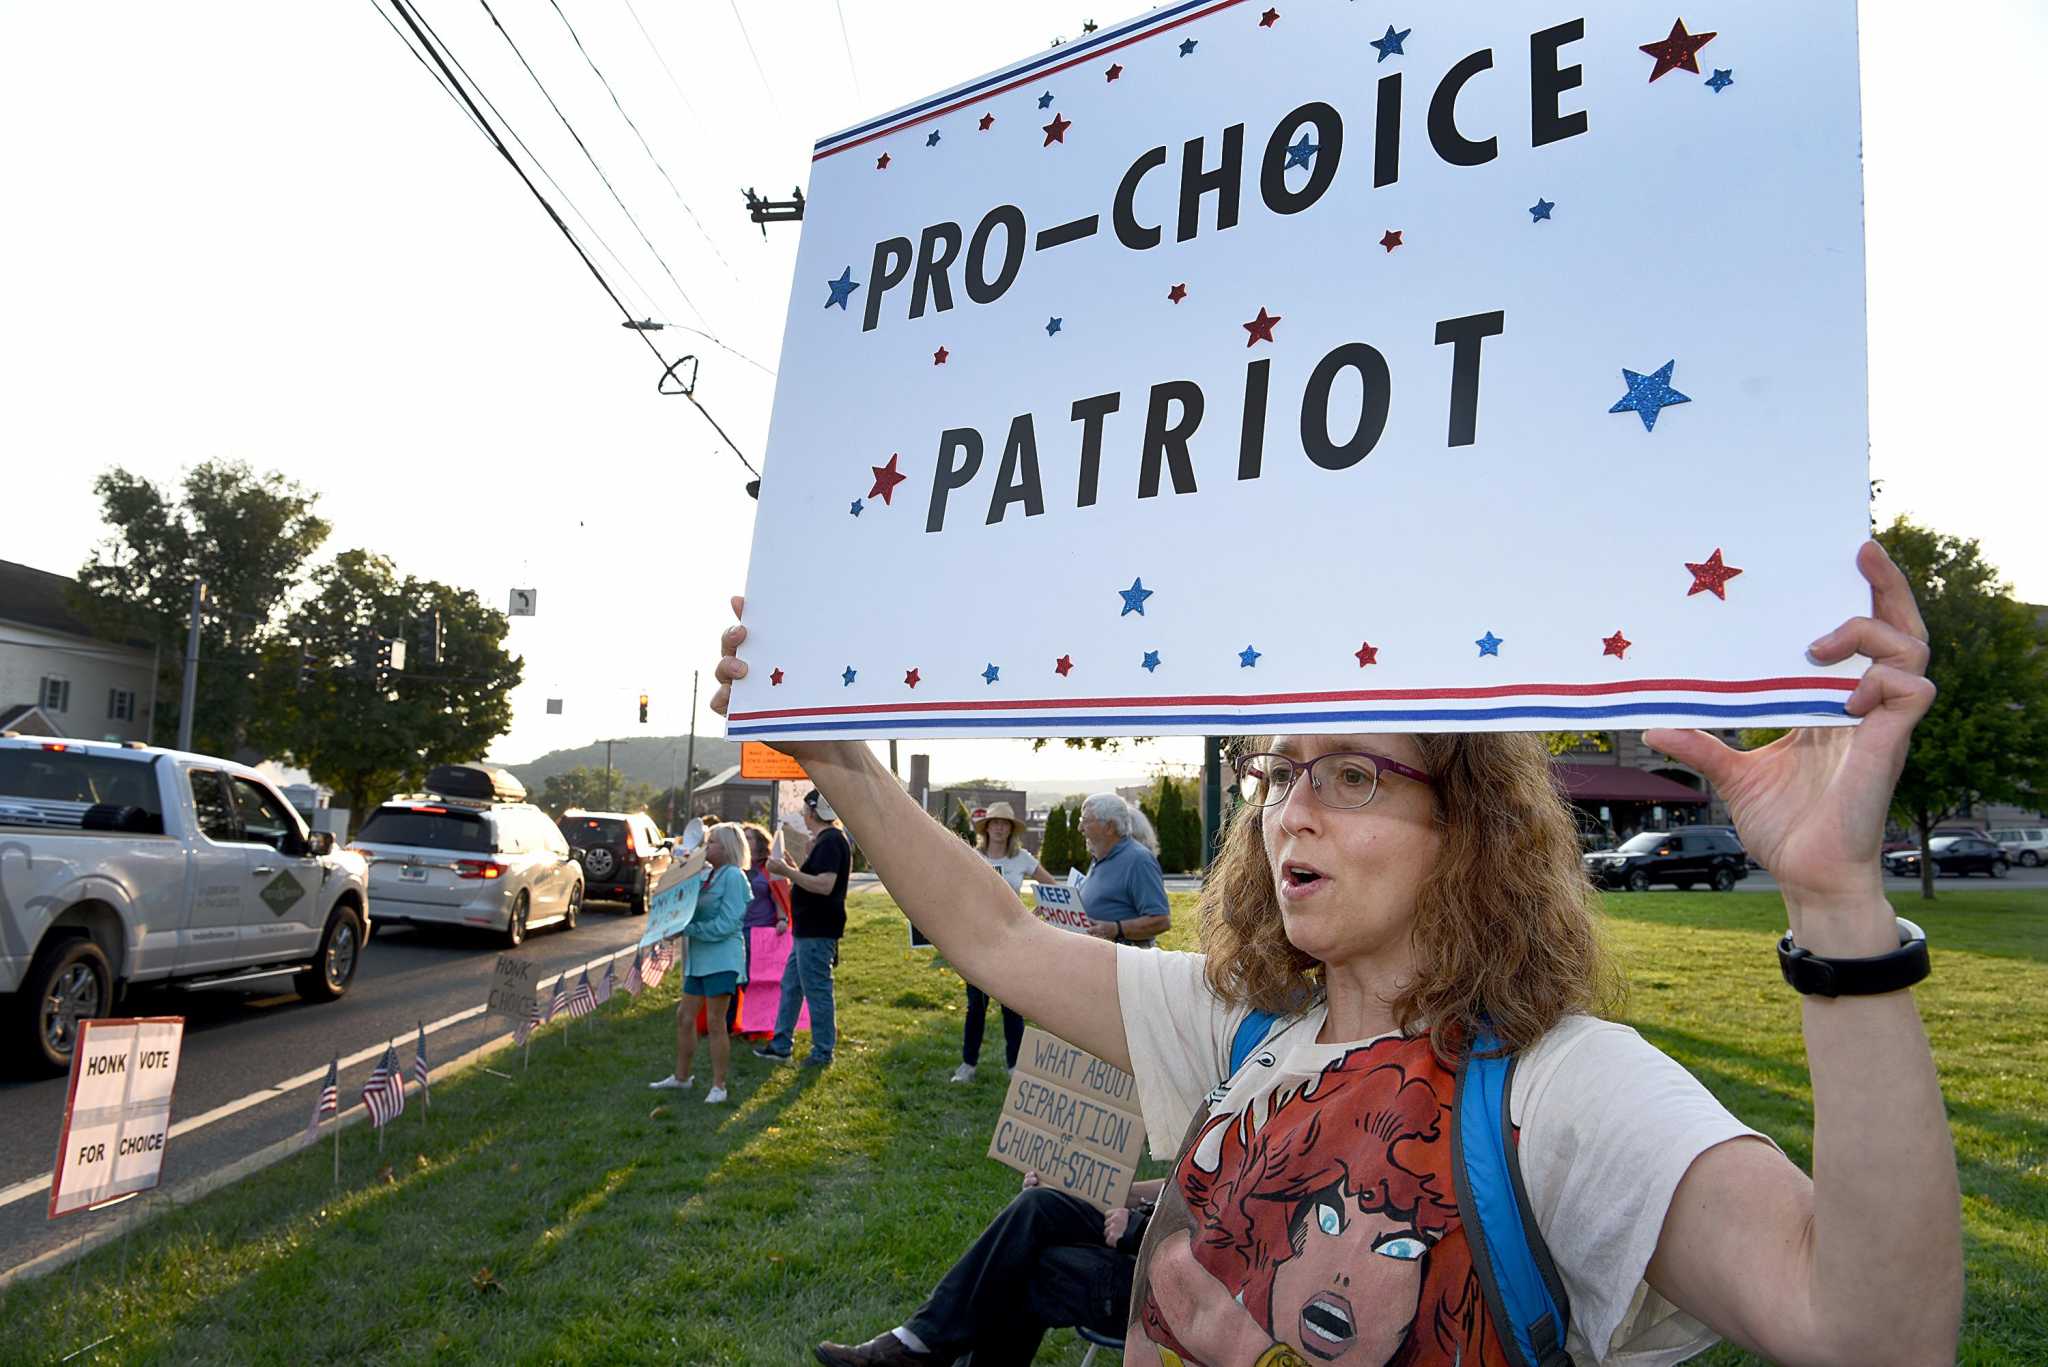 Protesters in New Milford, Danbury focus on abortion after Roe v. Wade. But they're on different sides.